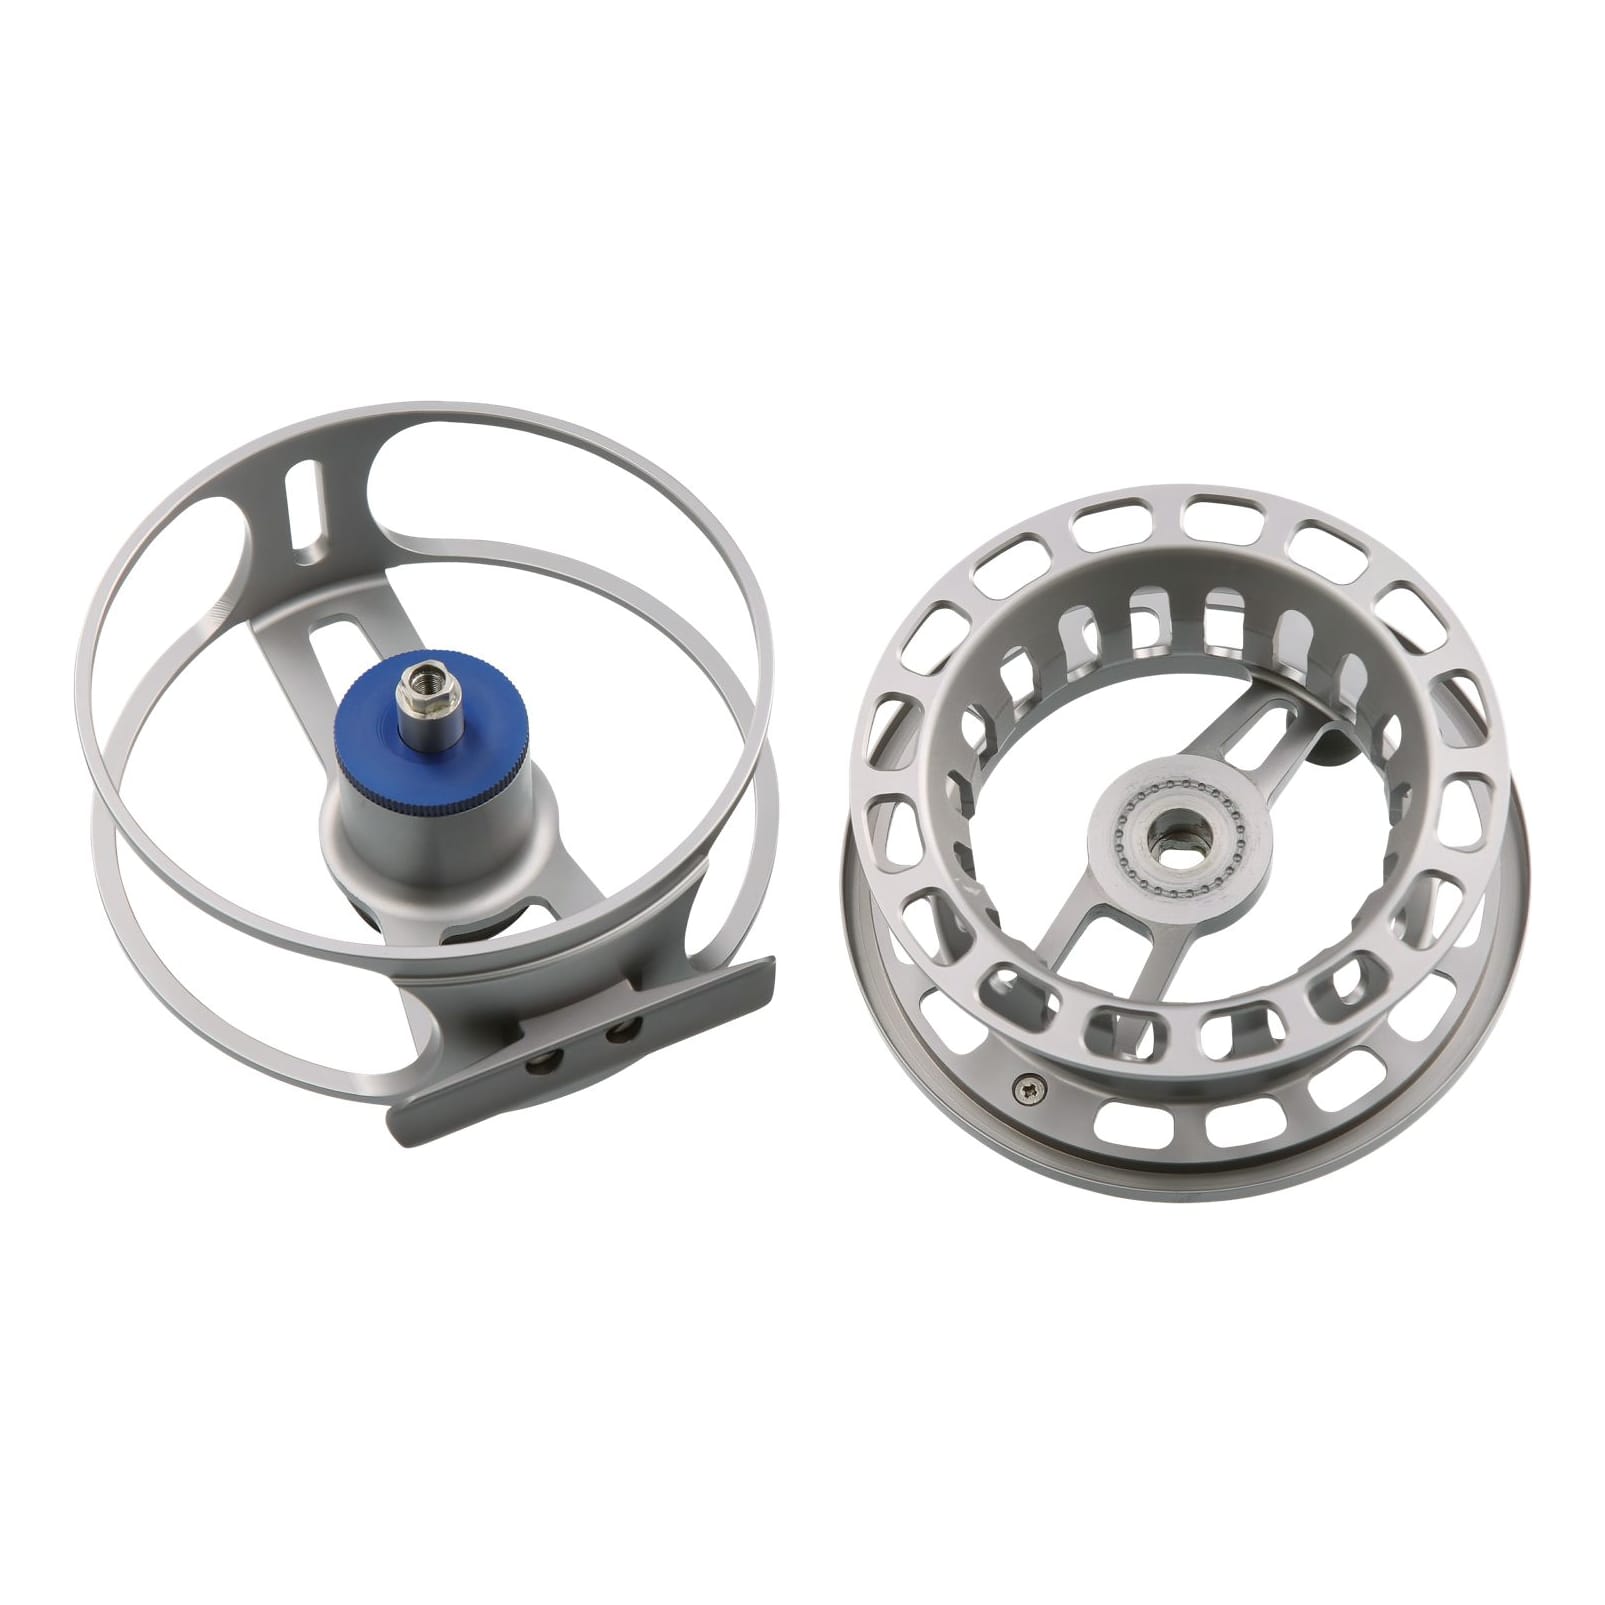 World Wide Sportsman® Gold Cup Fly Reel 